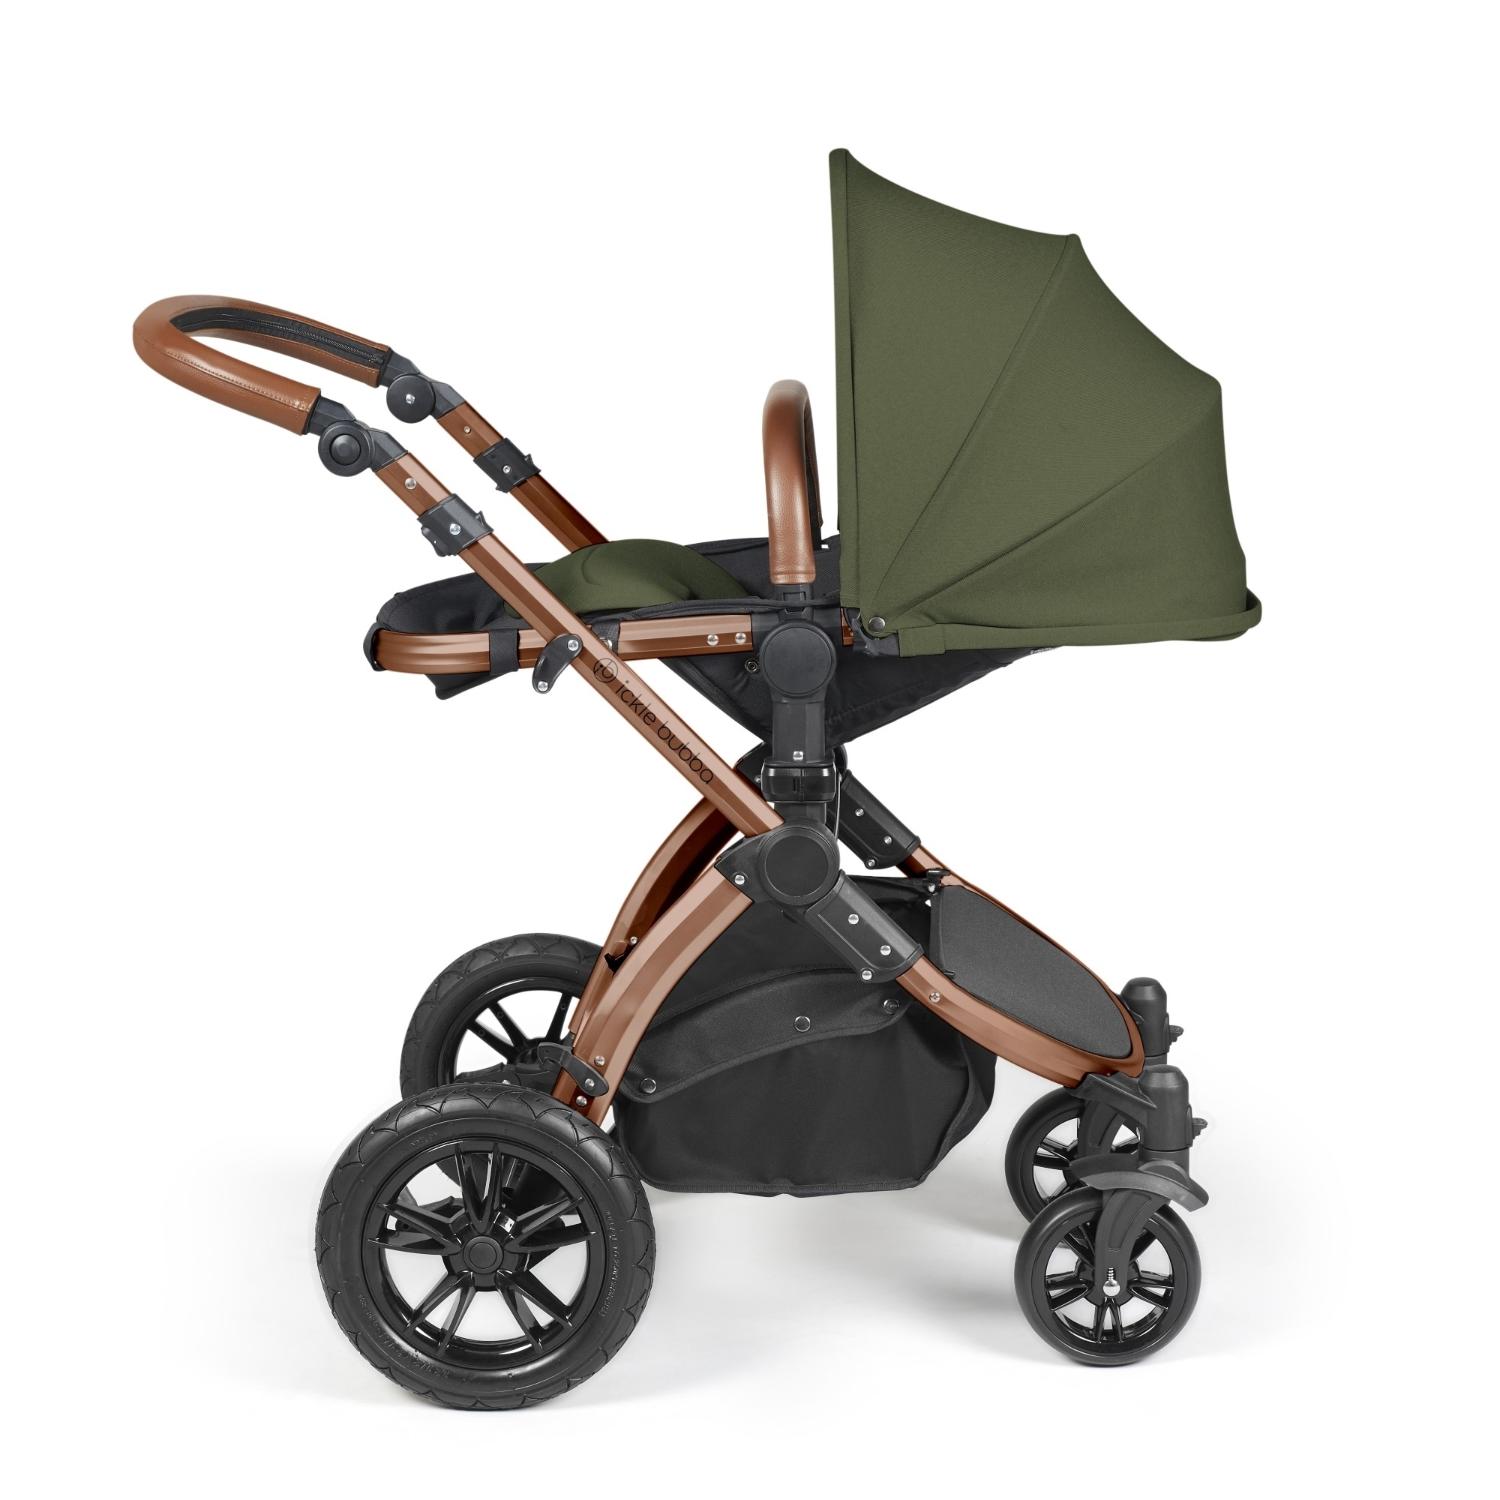 Recline position of Ickle Bubba Stomp Luxe Pushchair in Woodland green colour with bronze chassis and tan handle